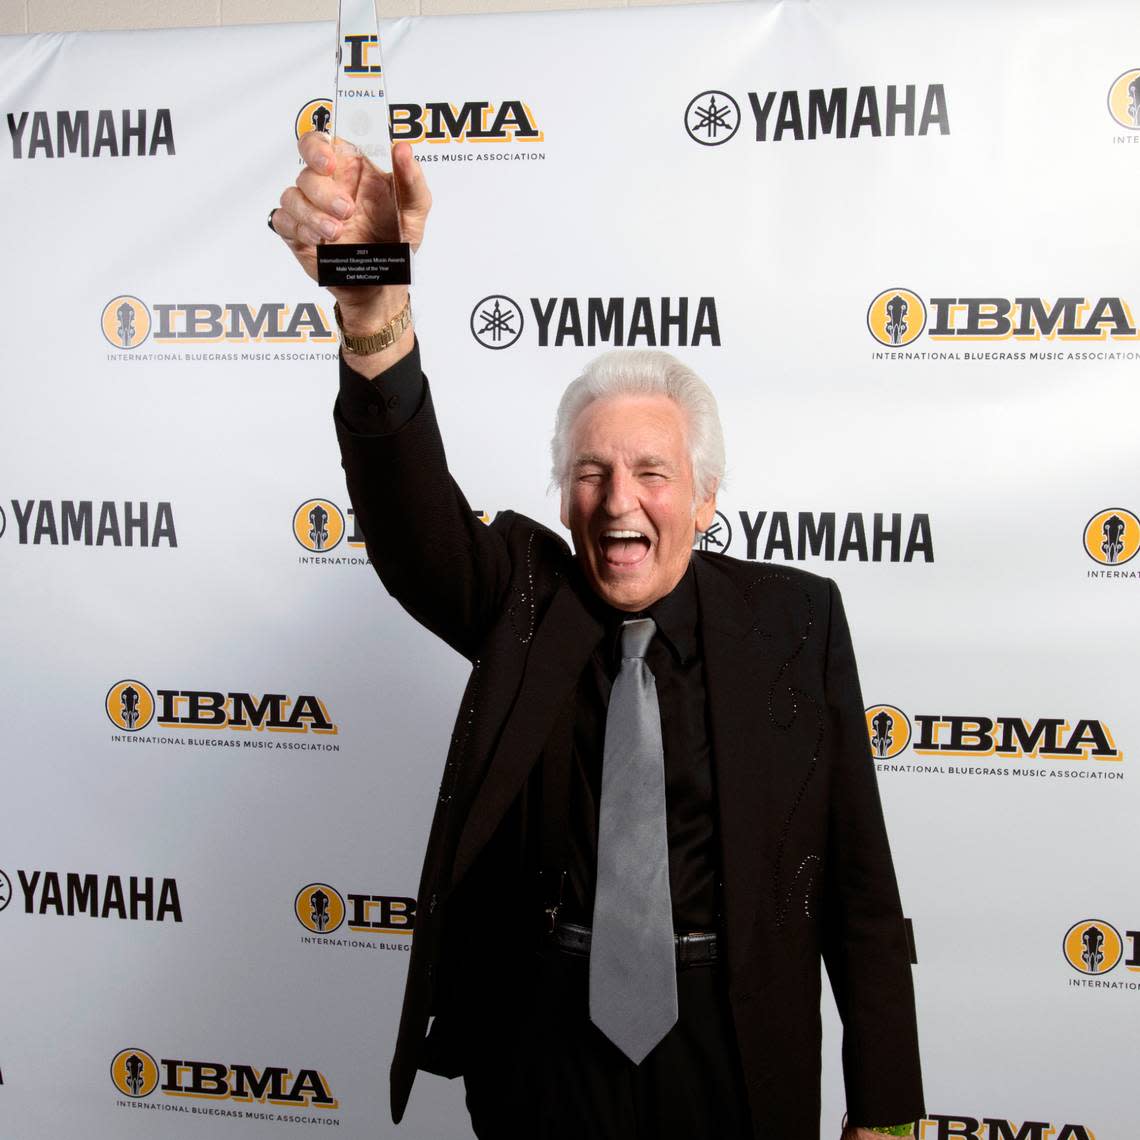 Del McCoury celebrates after sharing the Vocalist of the Year award at the 32nd Annual IBMA Bluegrass Music Awards in Raleigh, N.C., Thursday night, Sept. 30, 2021.